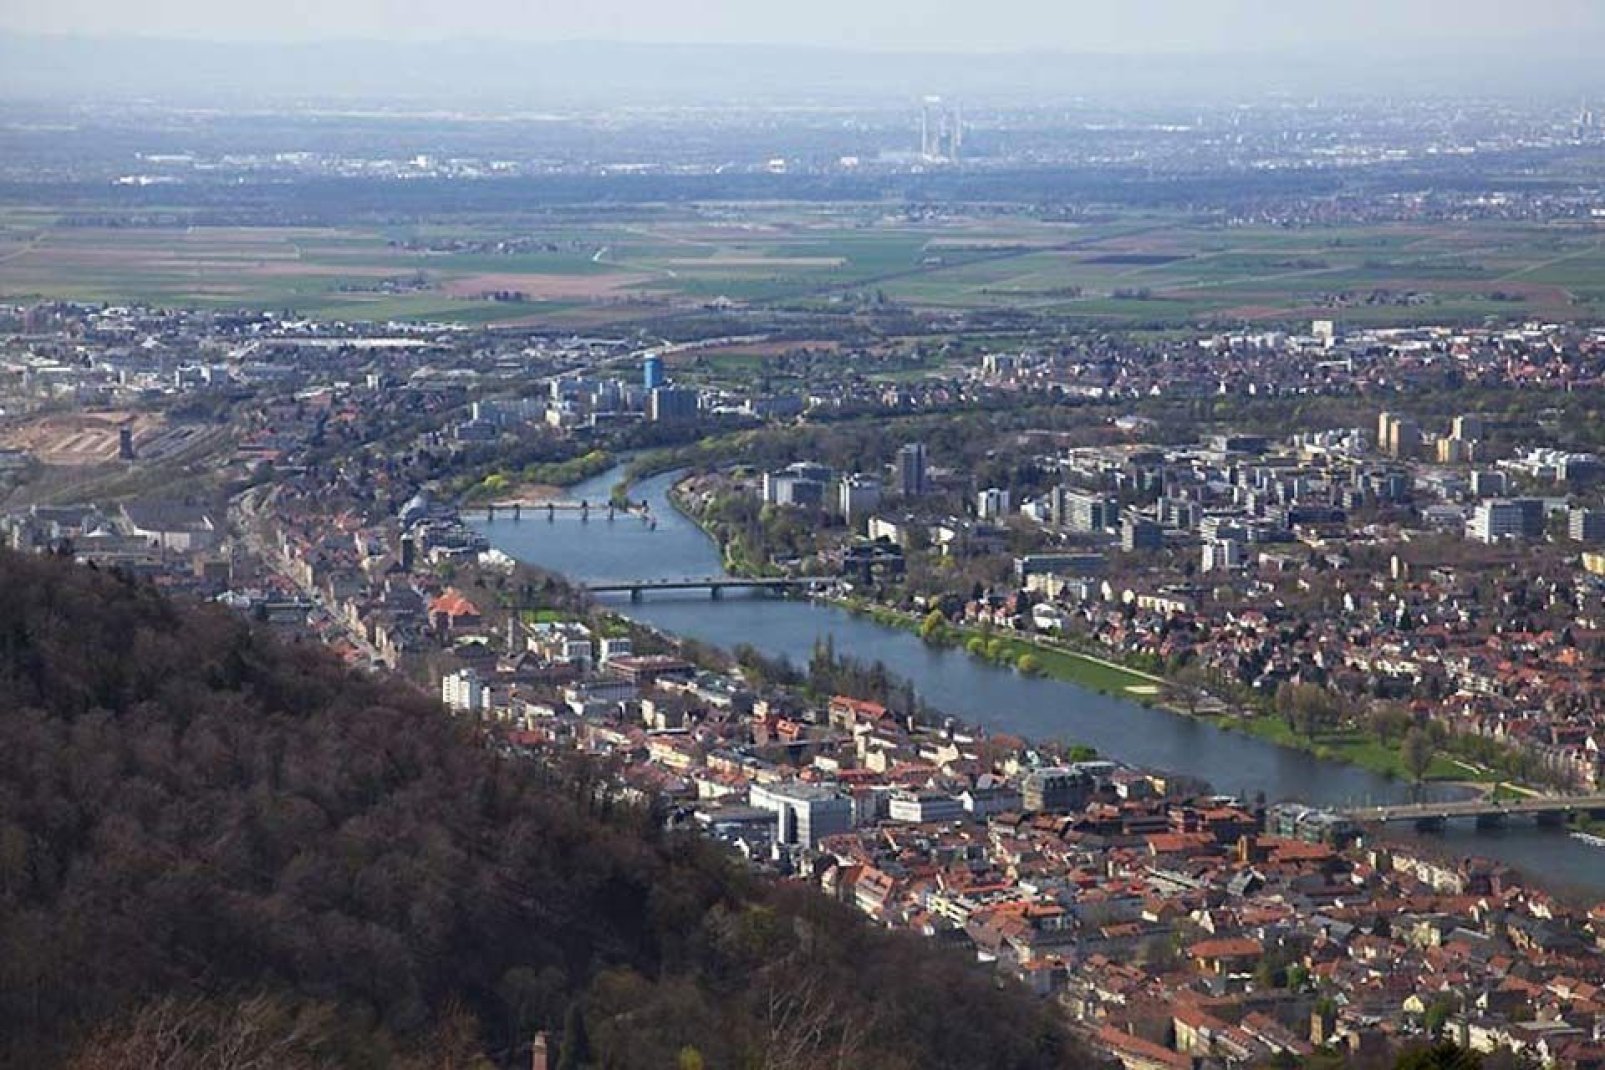 The city of Heidelberg stands on the banks of the river Neckar.